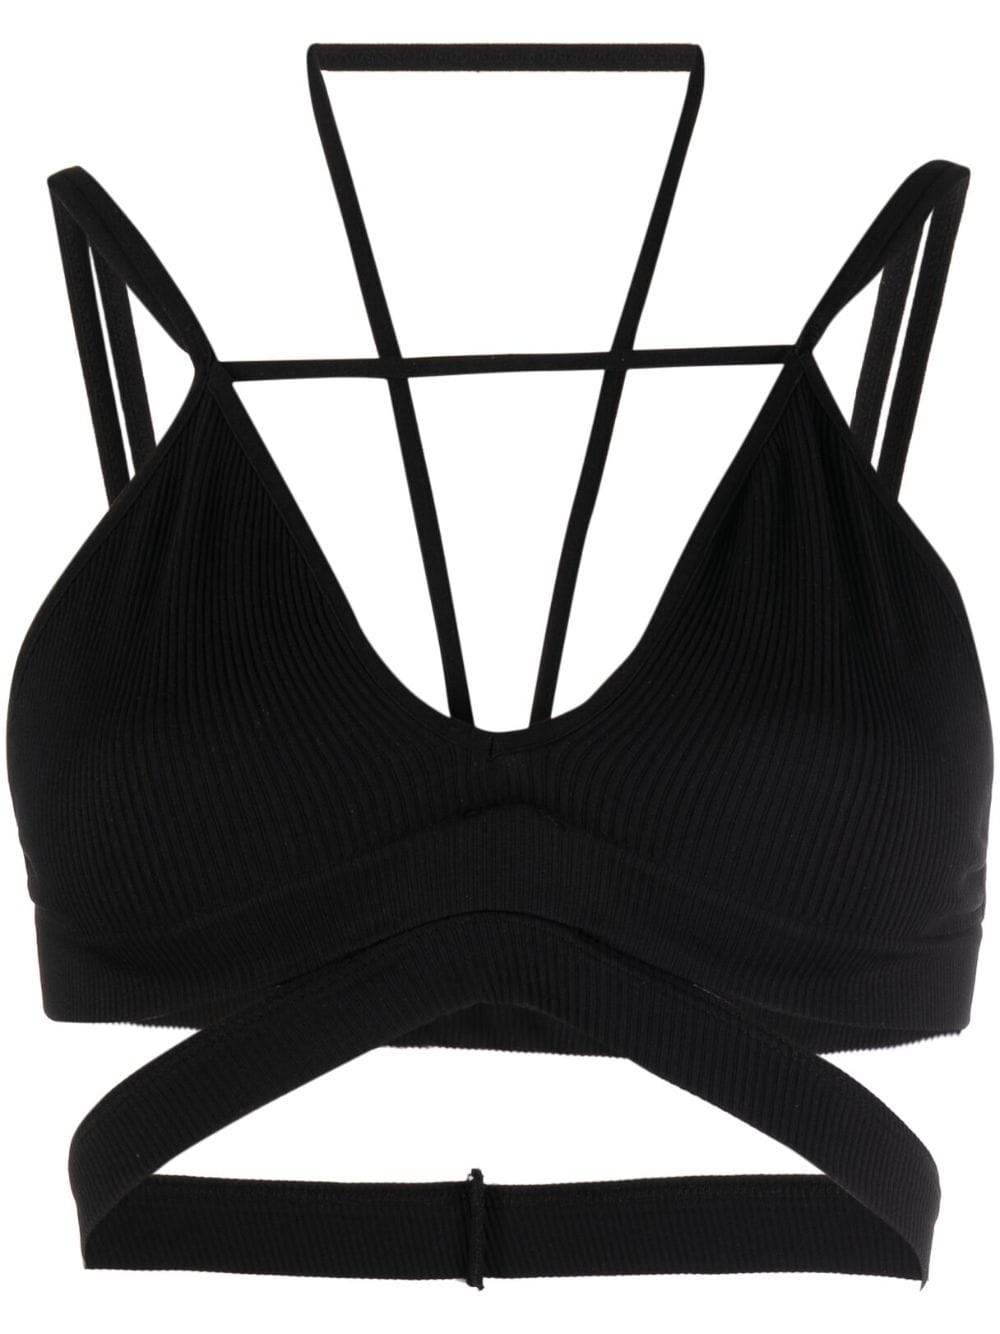 RIBBED JERSEY BRA WITH STRAPPY DETAILS A - ANDREADAMO - TMQ